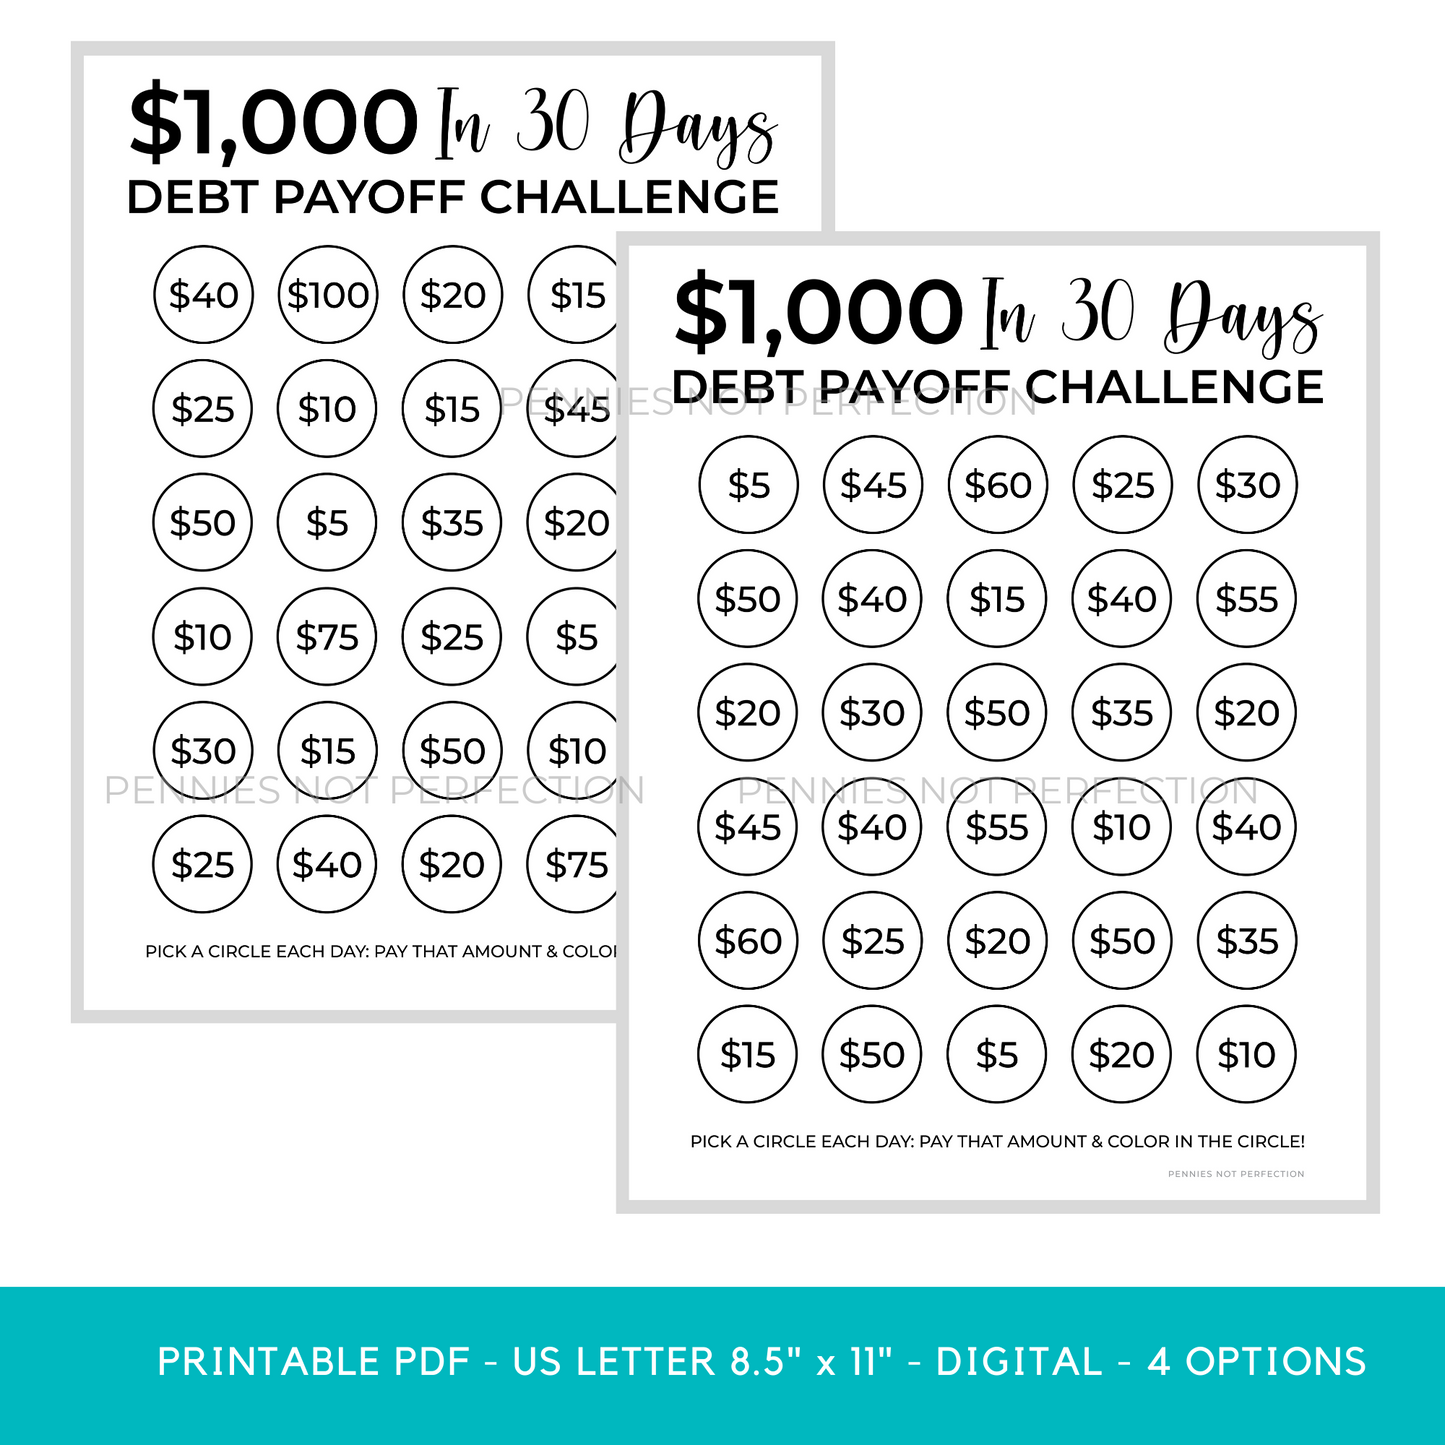 Debt Payoff Challenge Tracker Printable | Pay Off $1,000 In 30 Days